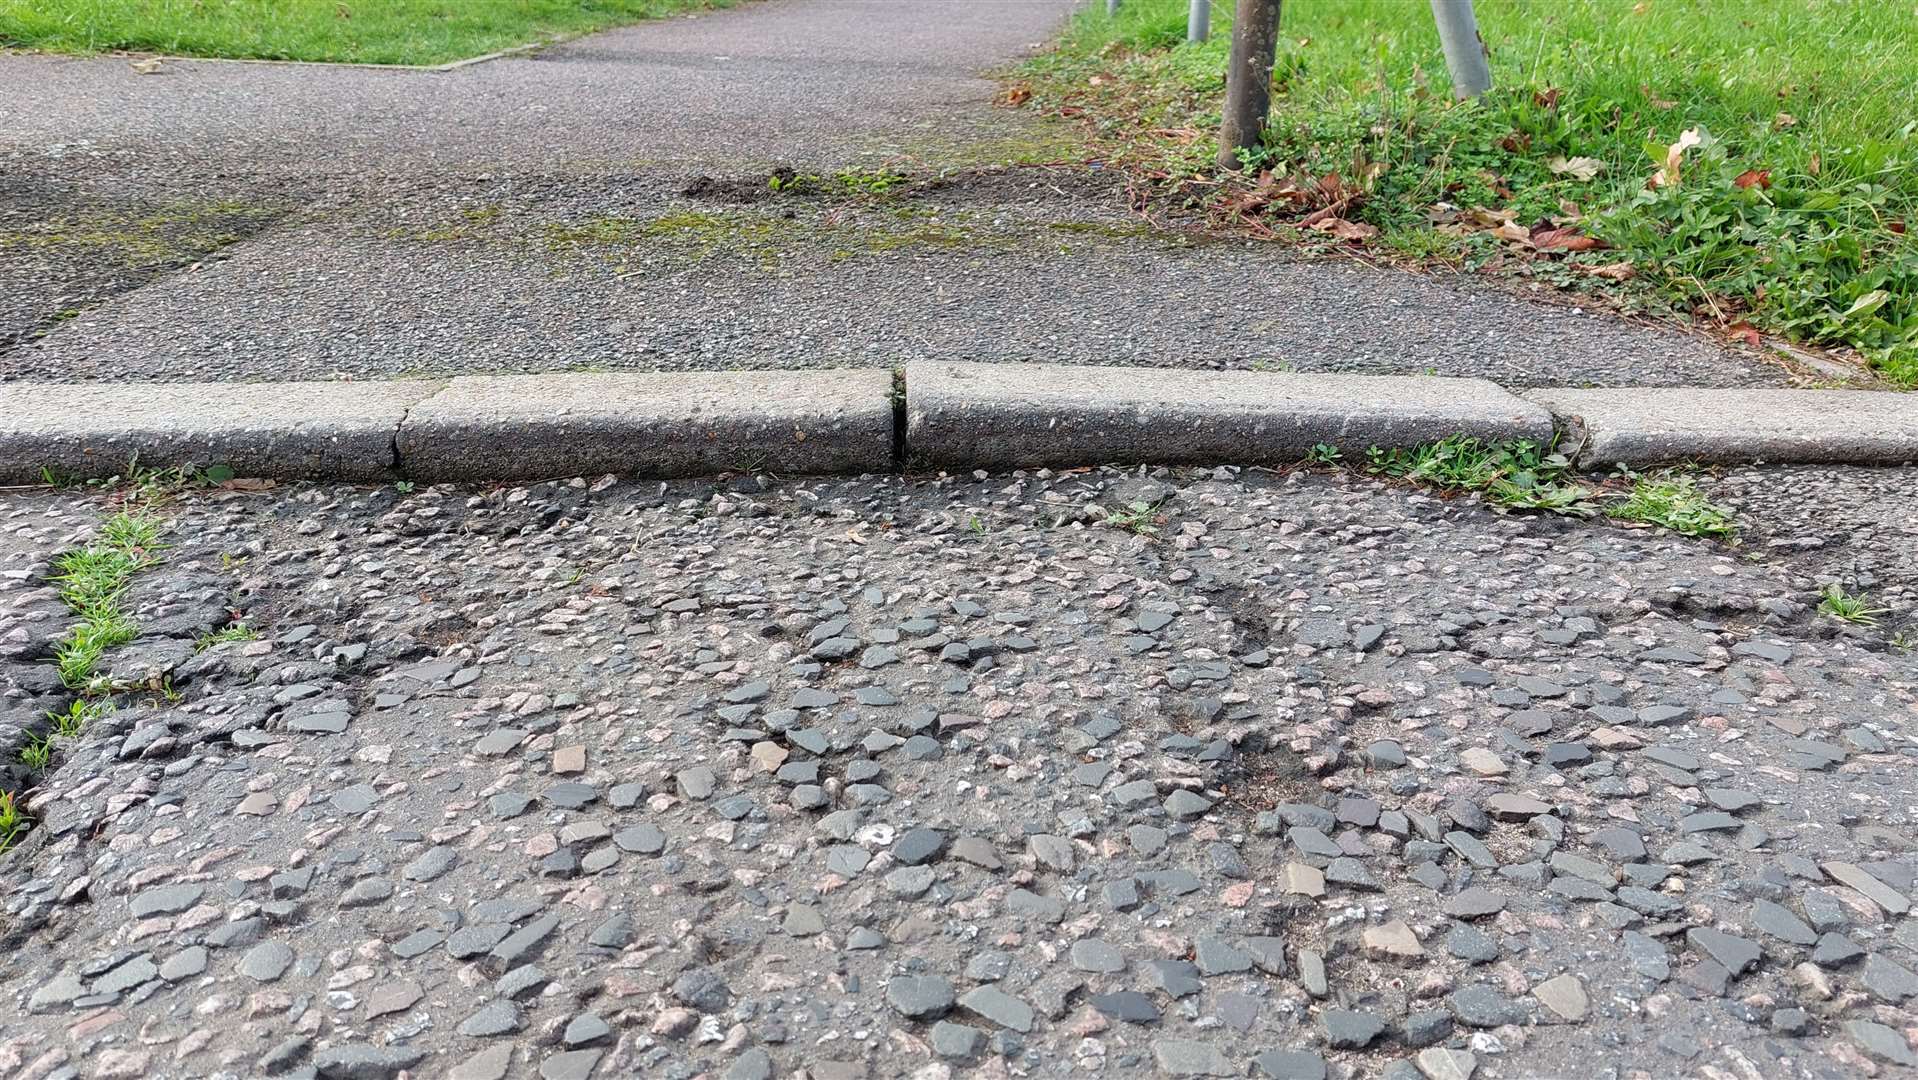 Mobility scooter users say some dropped kerbs in Ashford are still too high for them to use, like this one in Bentley Road, Willesborough